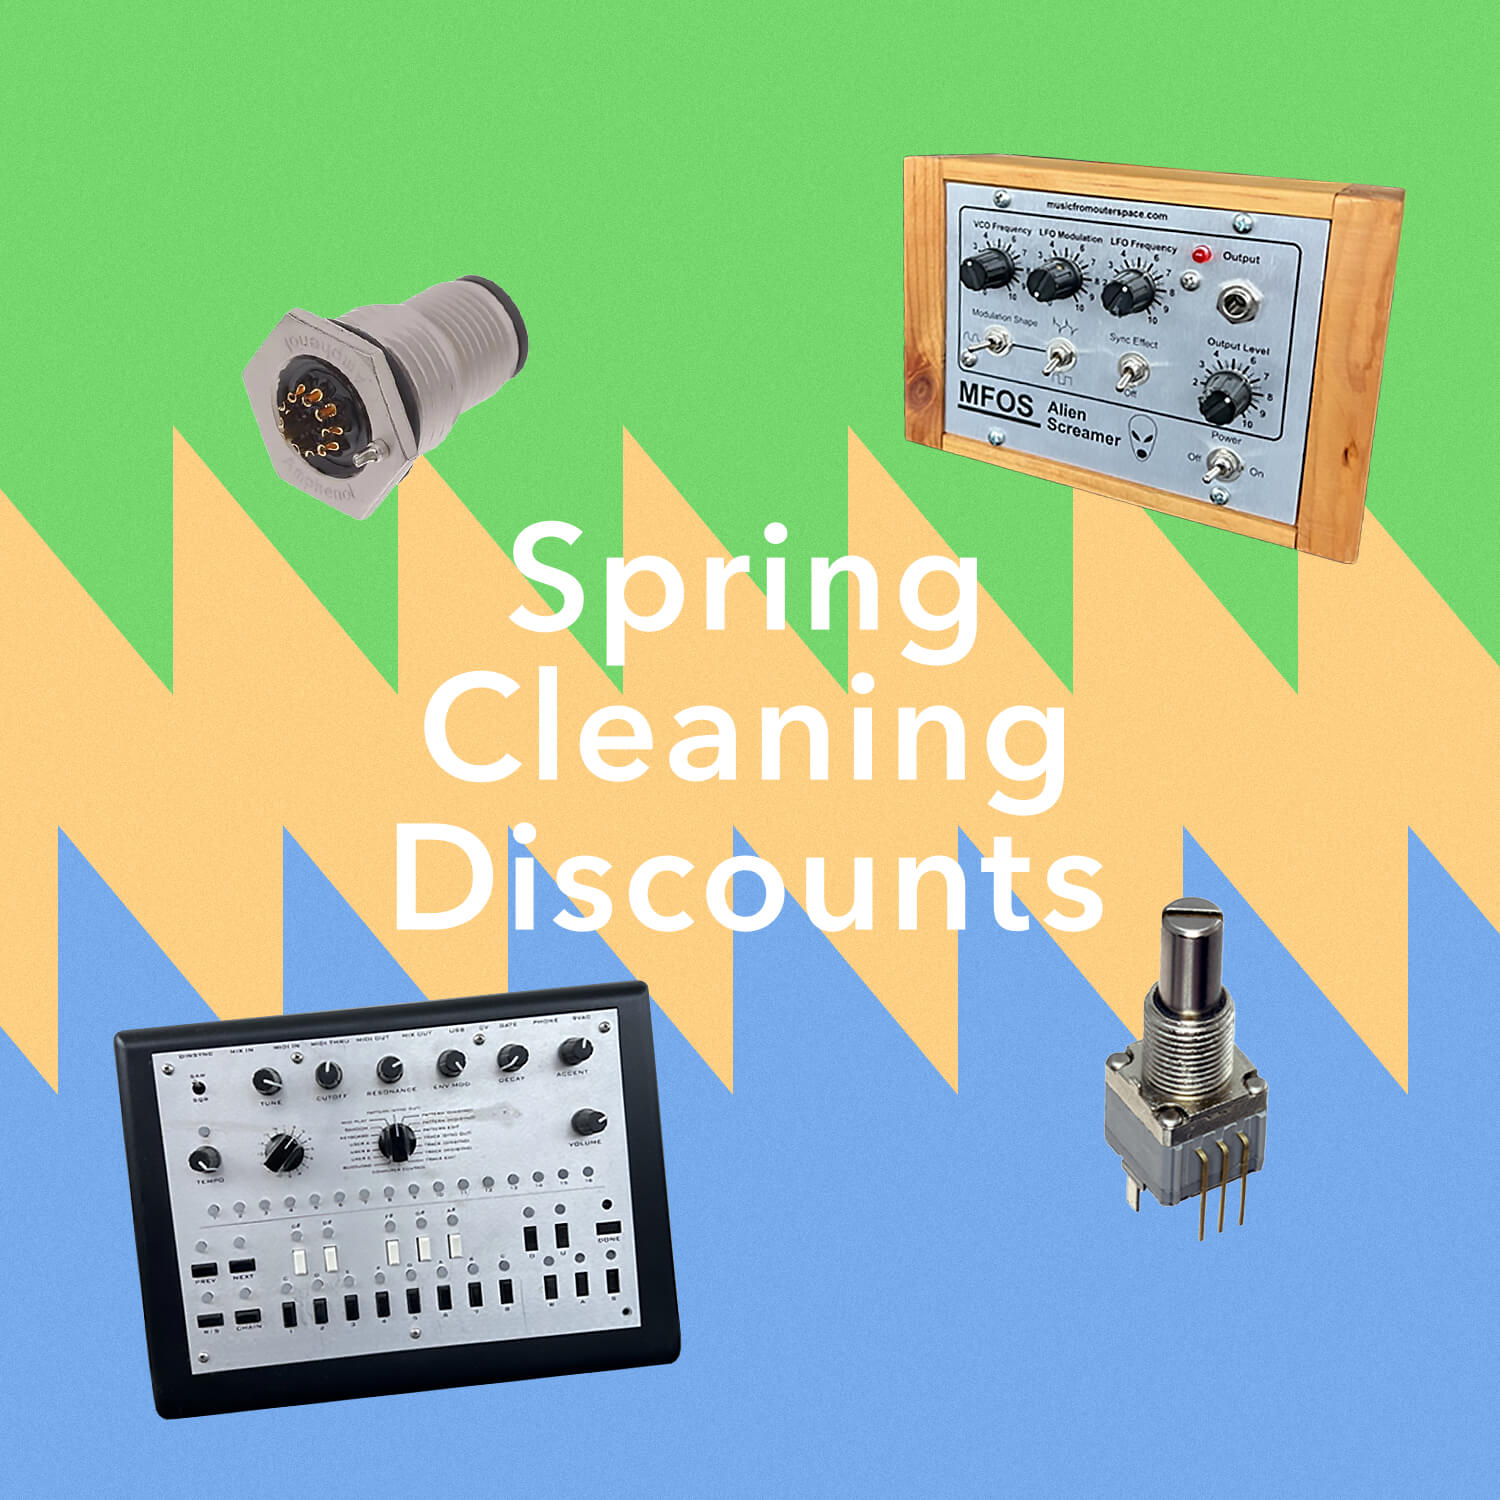 Synthesizer Discounts